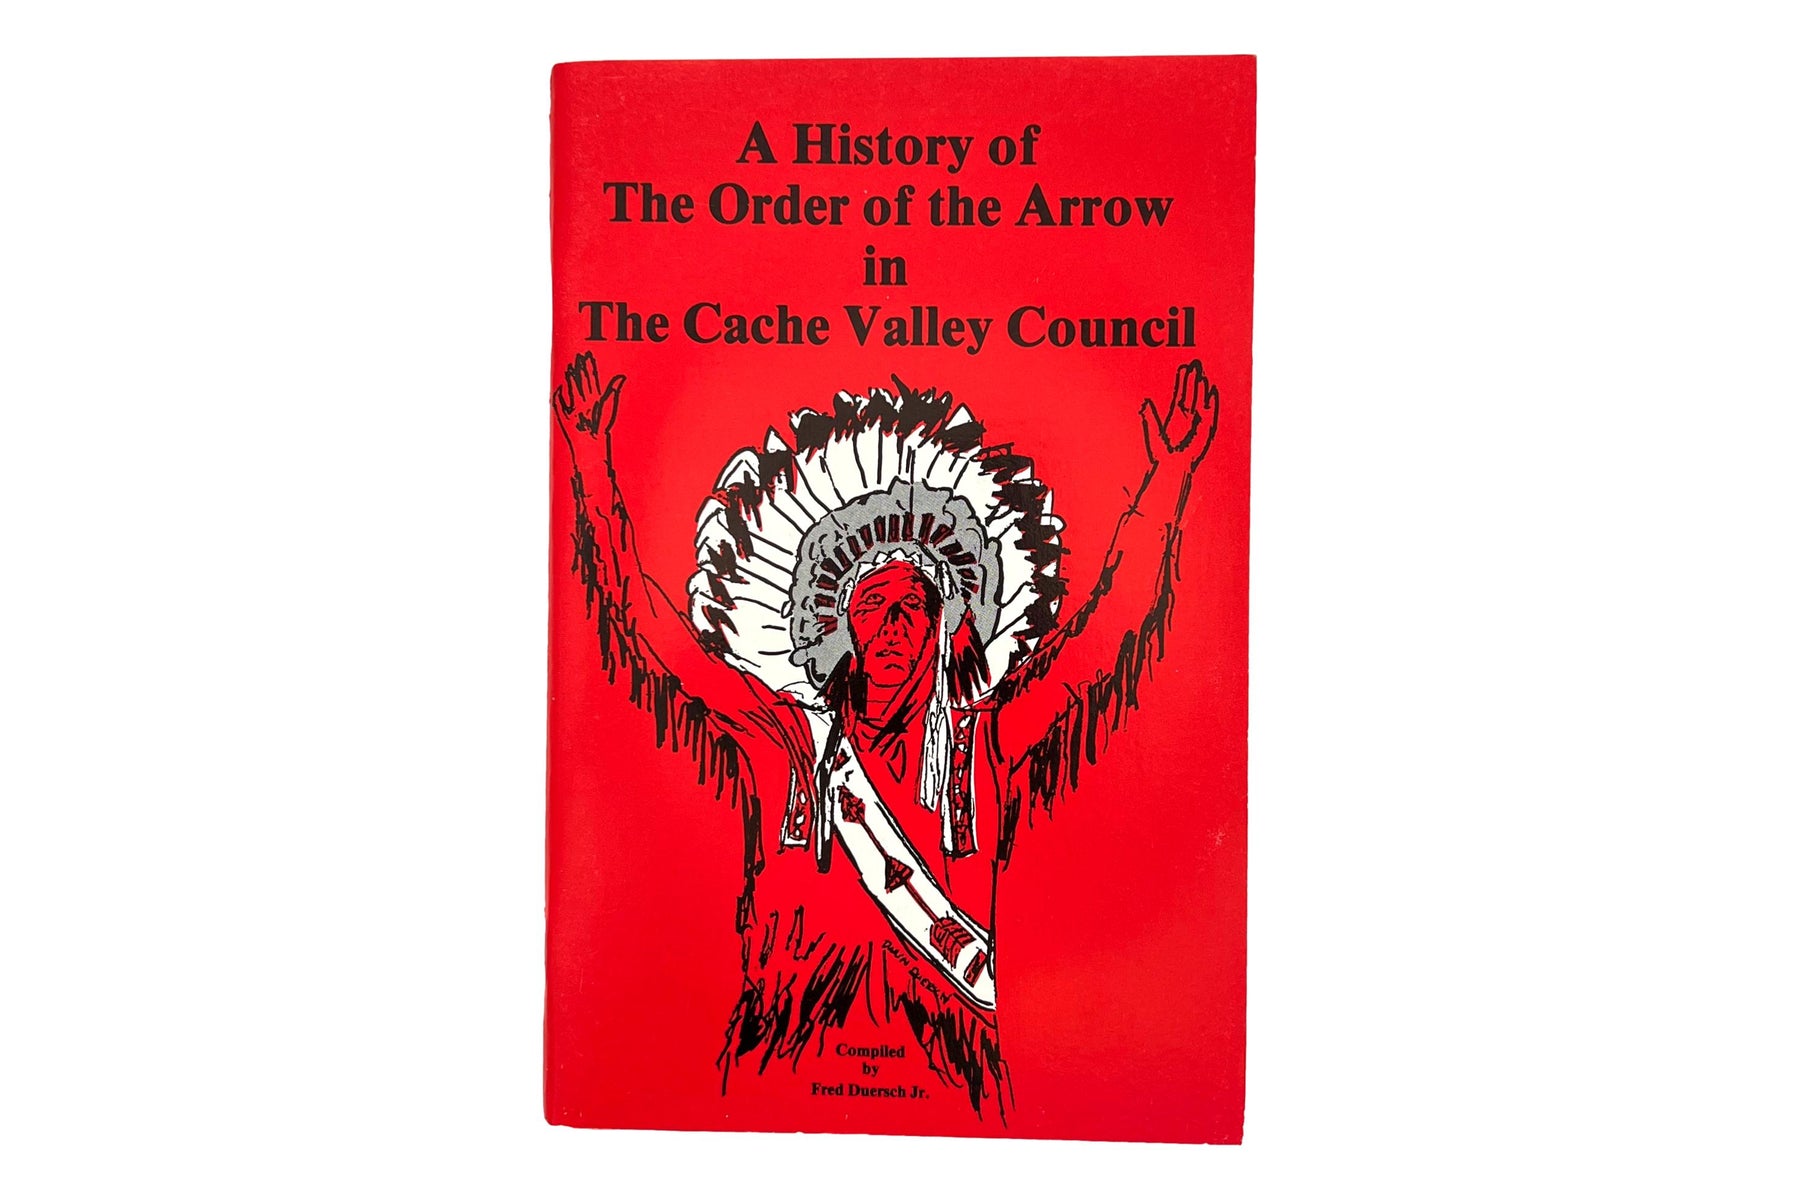 A History of The Order of the Arrow in The Cache Valley Council